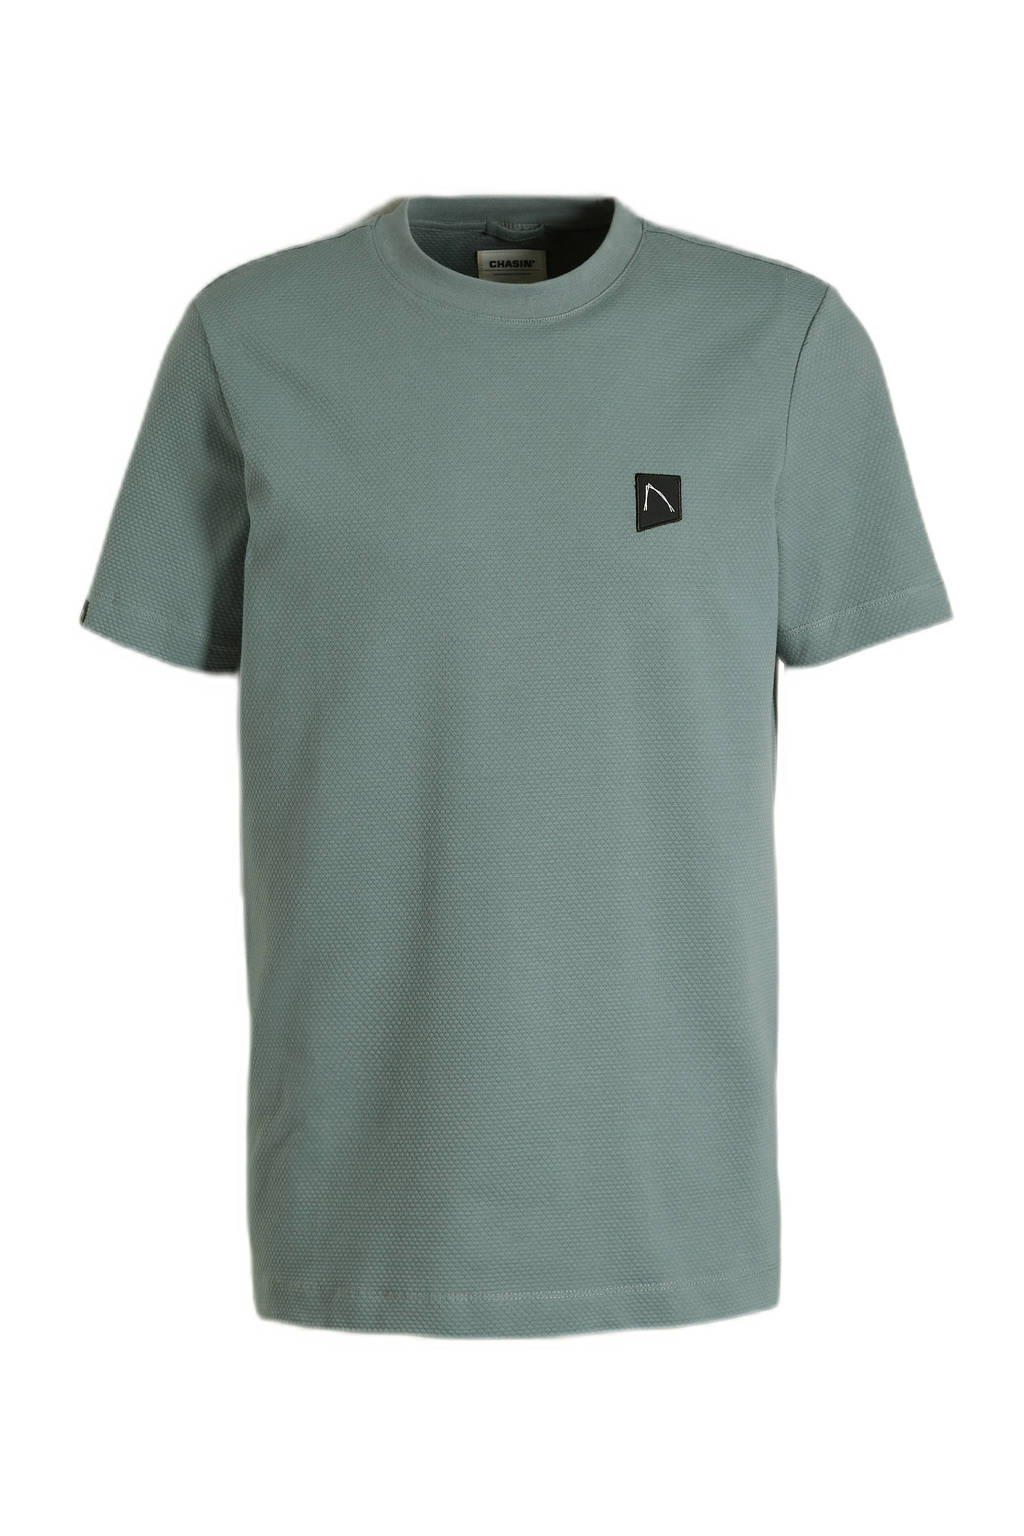 CHASIN' fit T-shirt Royce turquoise wehkamp